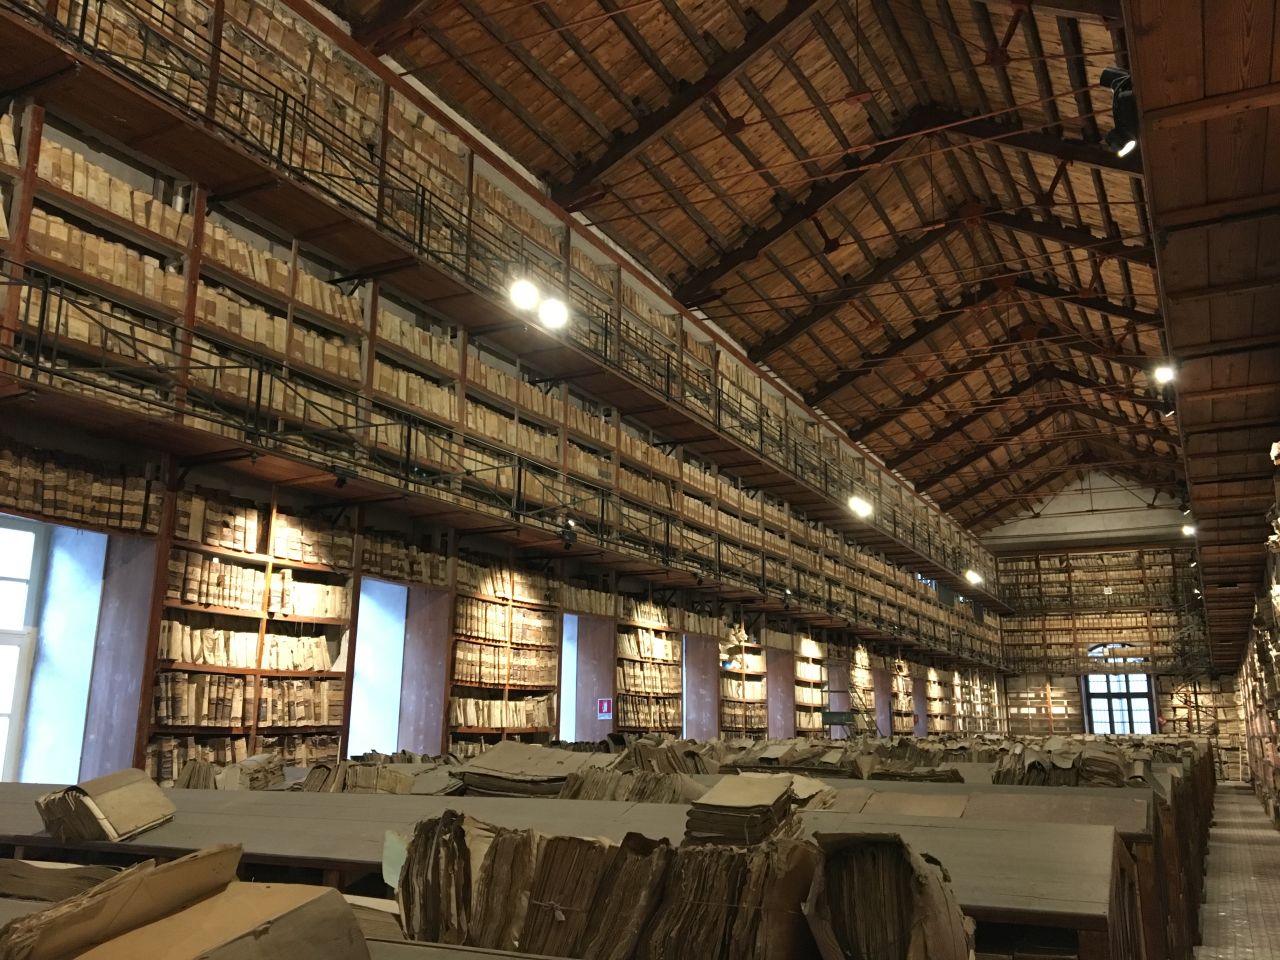 Finding missing records can be daunting. This is the State Archives in Palermo.